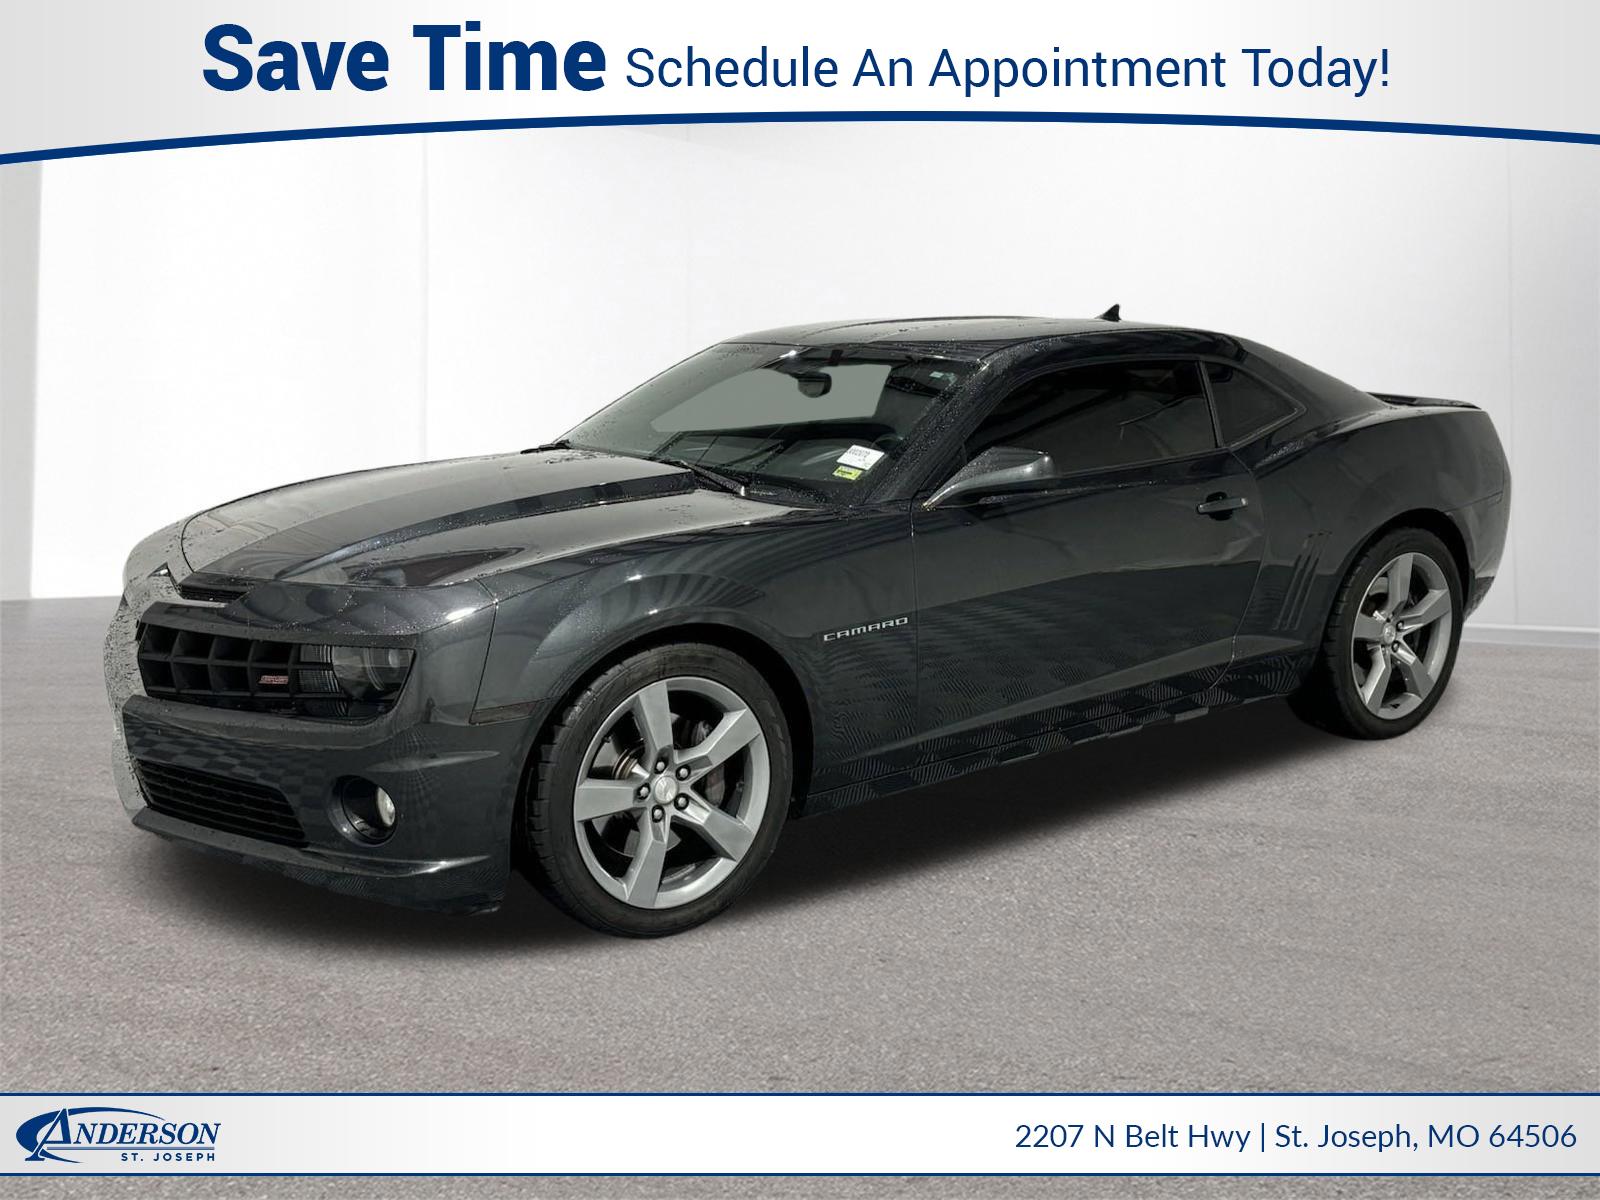 Used 2012 Chevrolet Camaro 1SS Coupe for sale in St Joseph MO